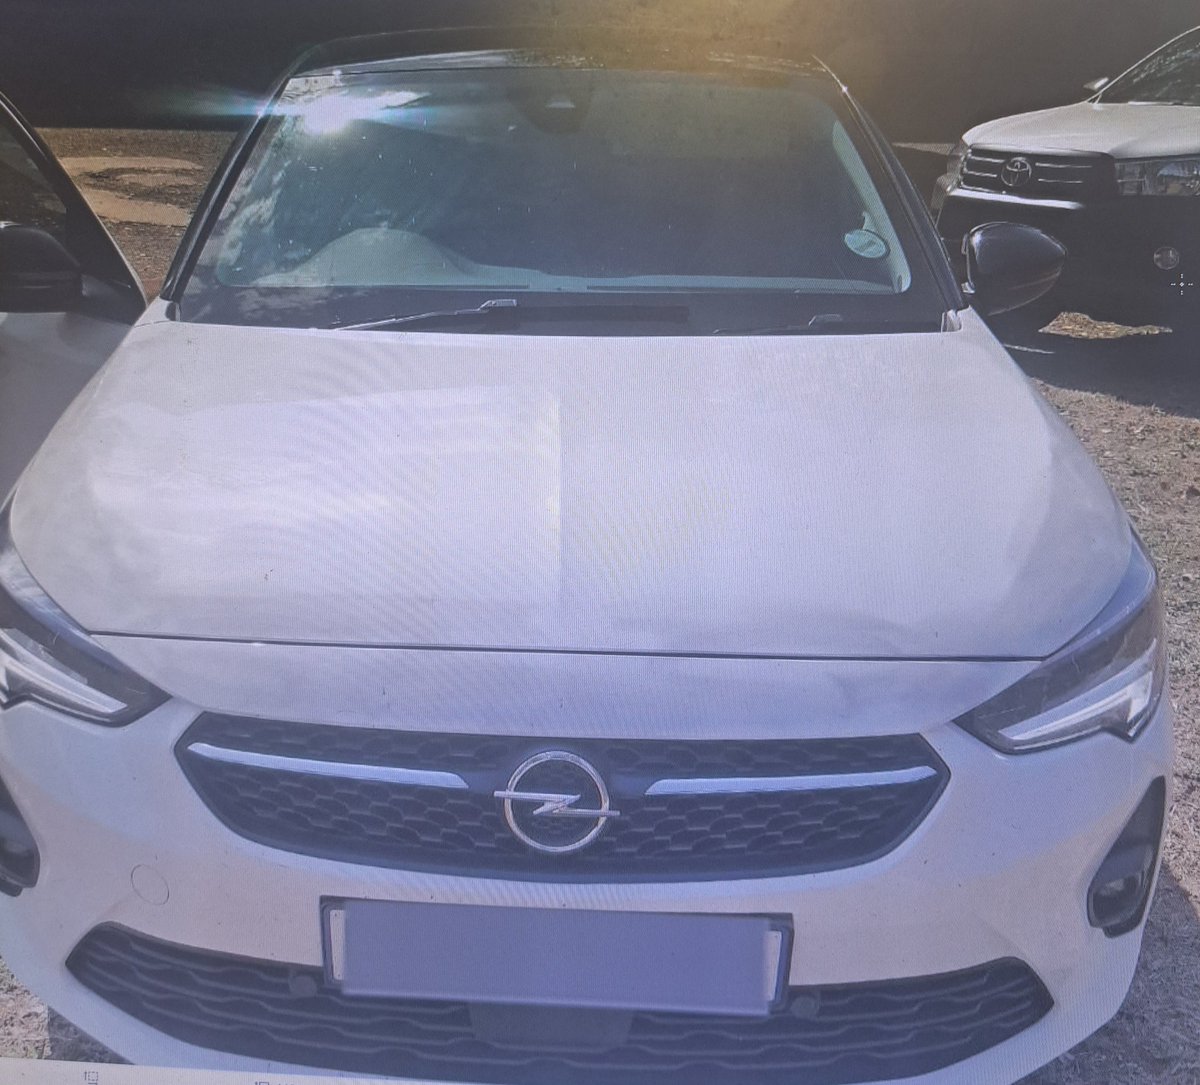 49 year old suspect arrested at a shopping center in Sinoville, the suspect was arrested in possession of a stolen Opel Corsa, suspect has been linked with several cases of house breaking & robberies that occurred in Garsfontein, Brooklyn and Lyttelton. One video went viral...